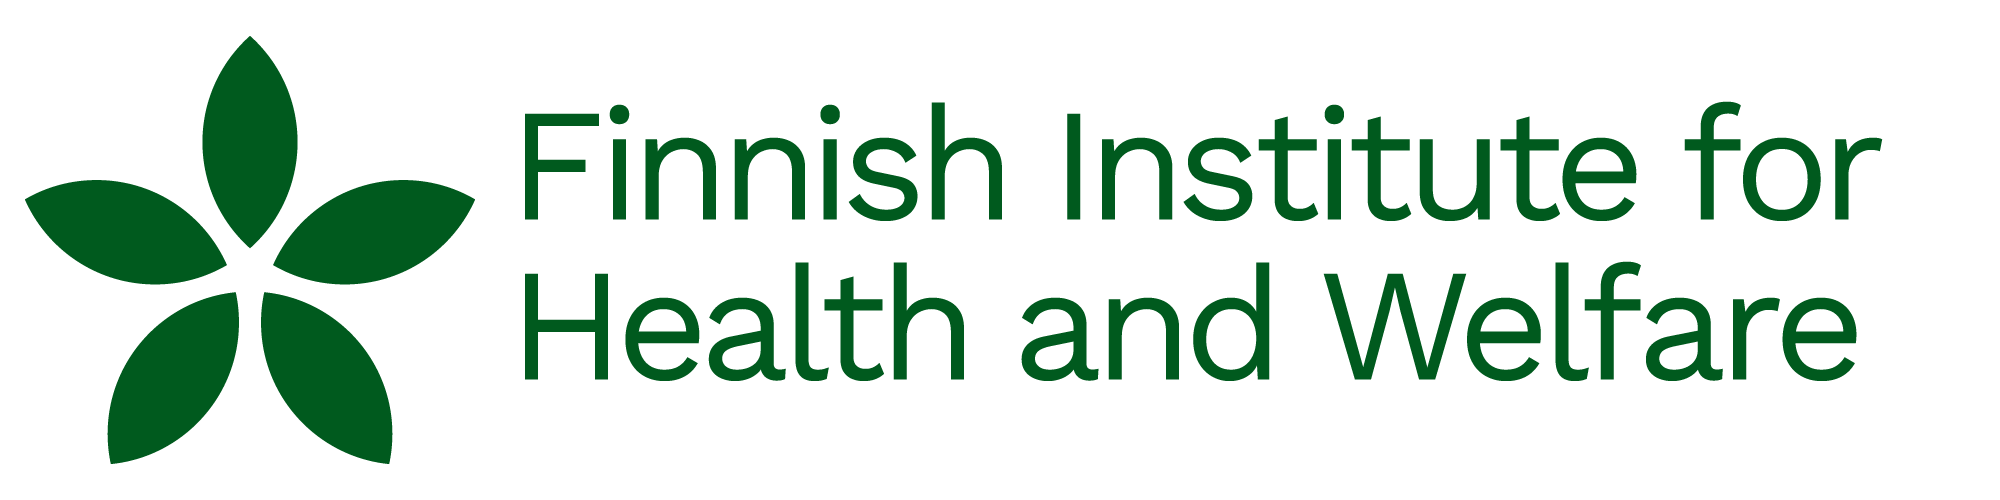 Finnish Institute for Health and Welfare (THL), Finland